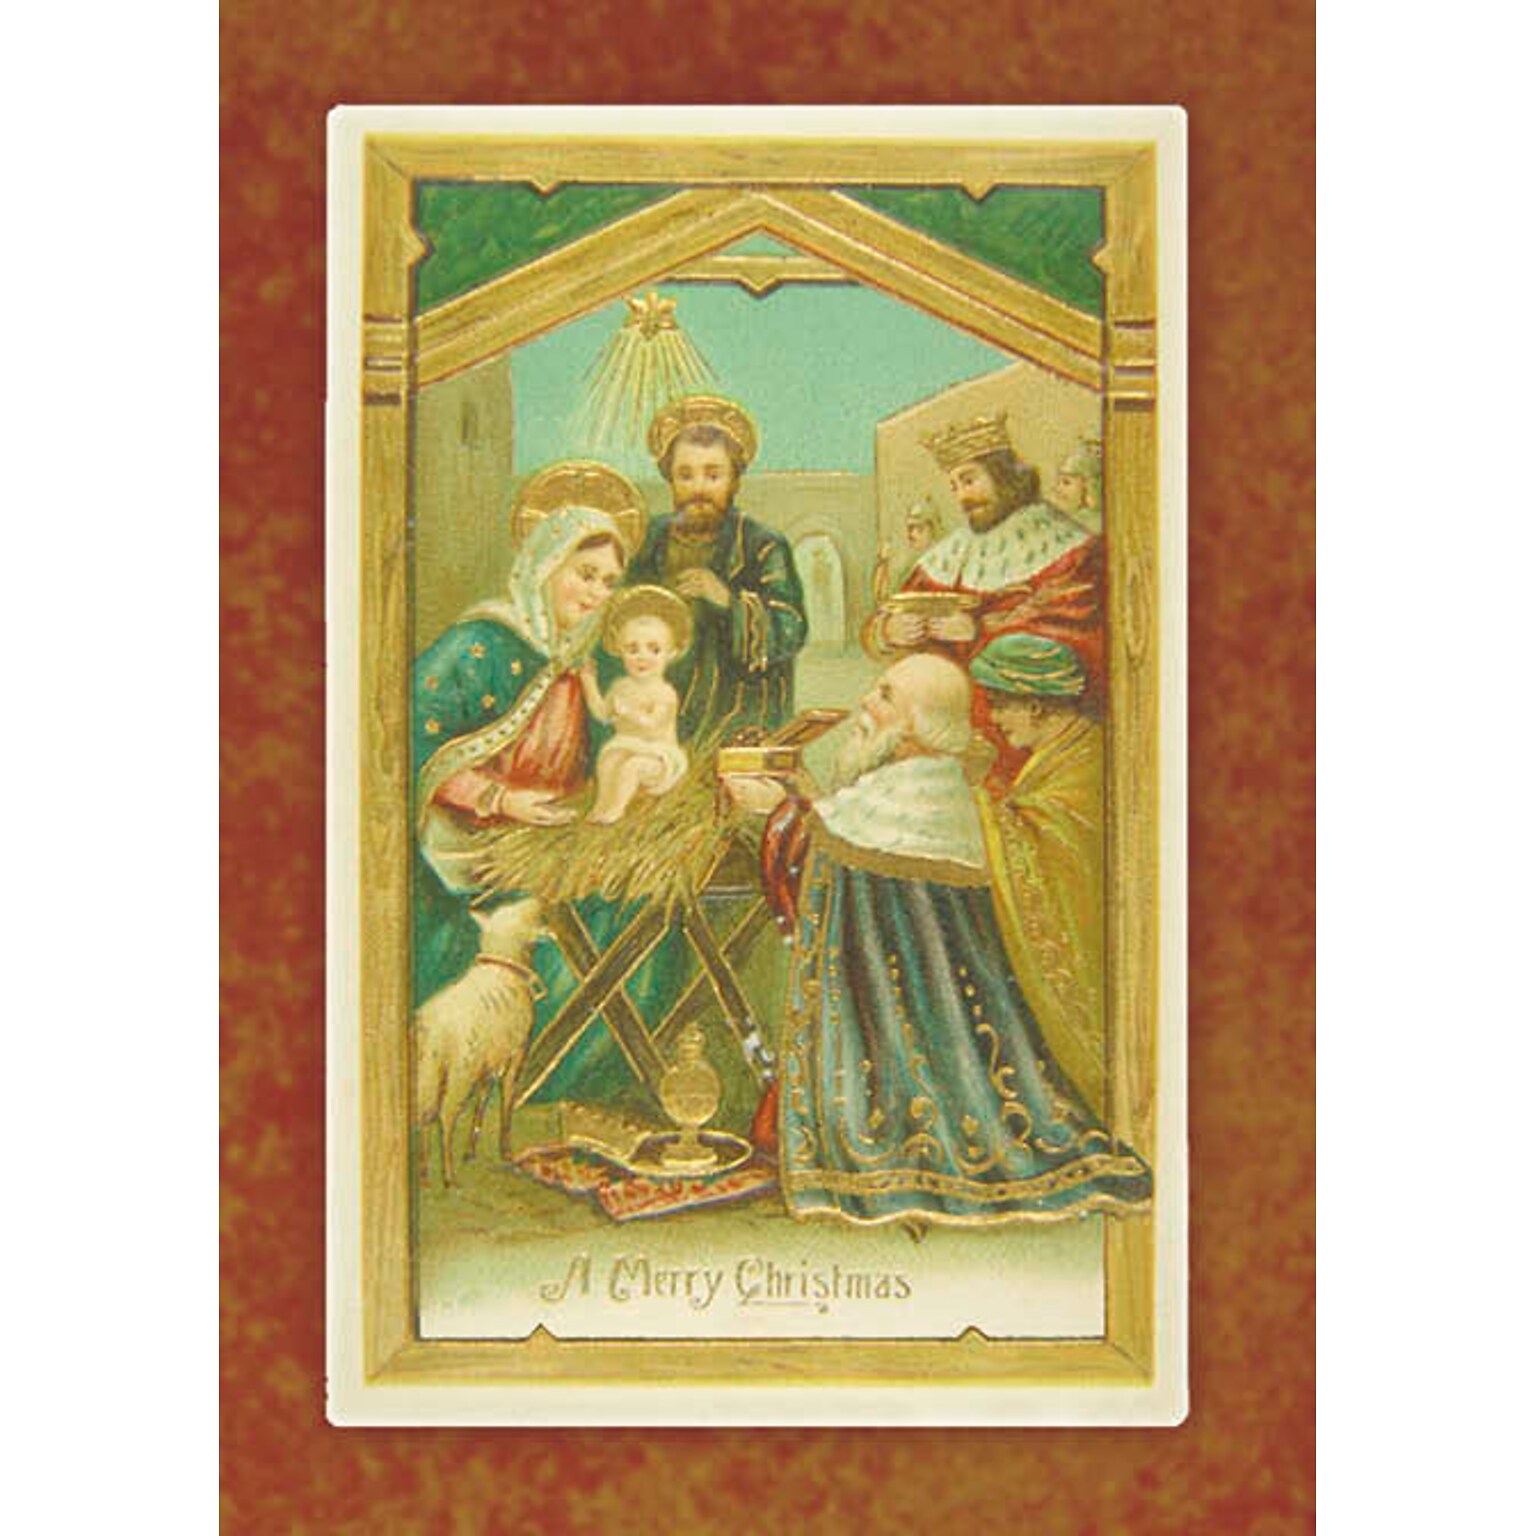 Vintage Greetings A Merry Christmas Holiday Greeting Cards, With A7 Envelopes, 7 x 5, 25 Cards per Set